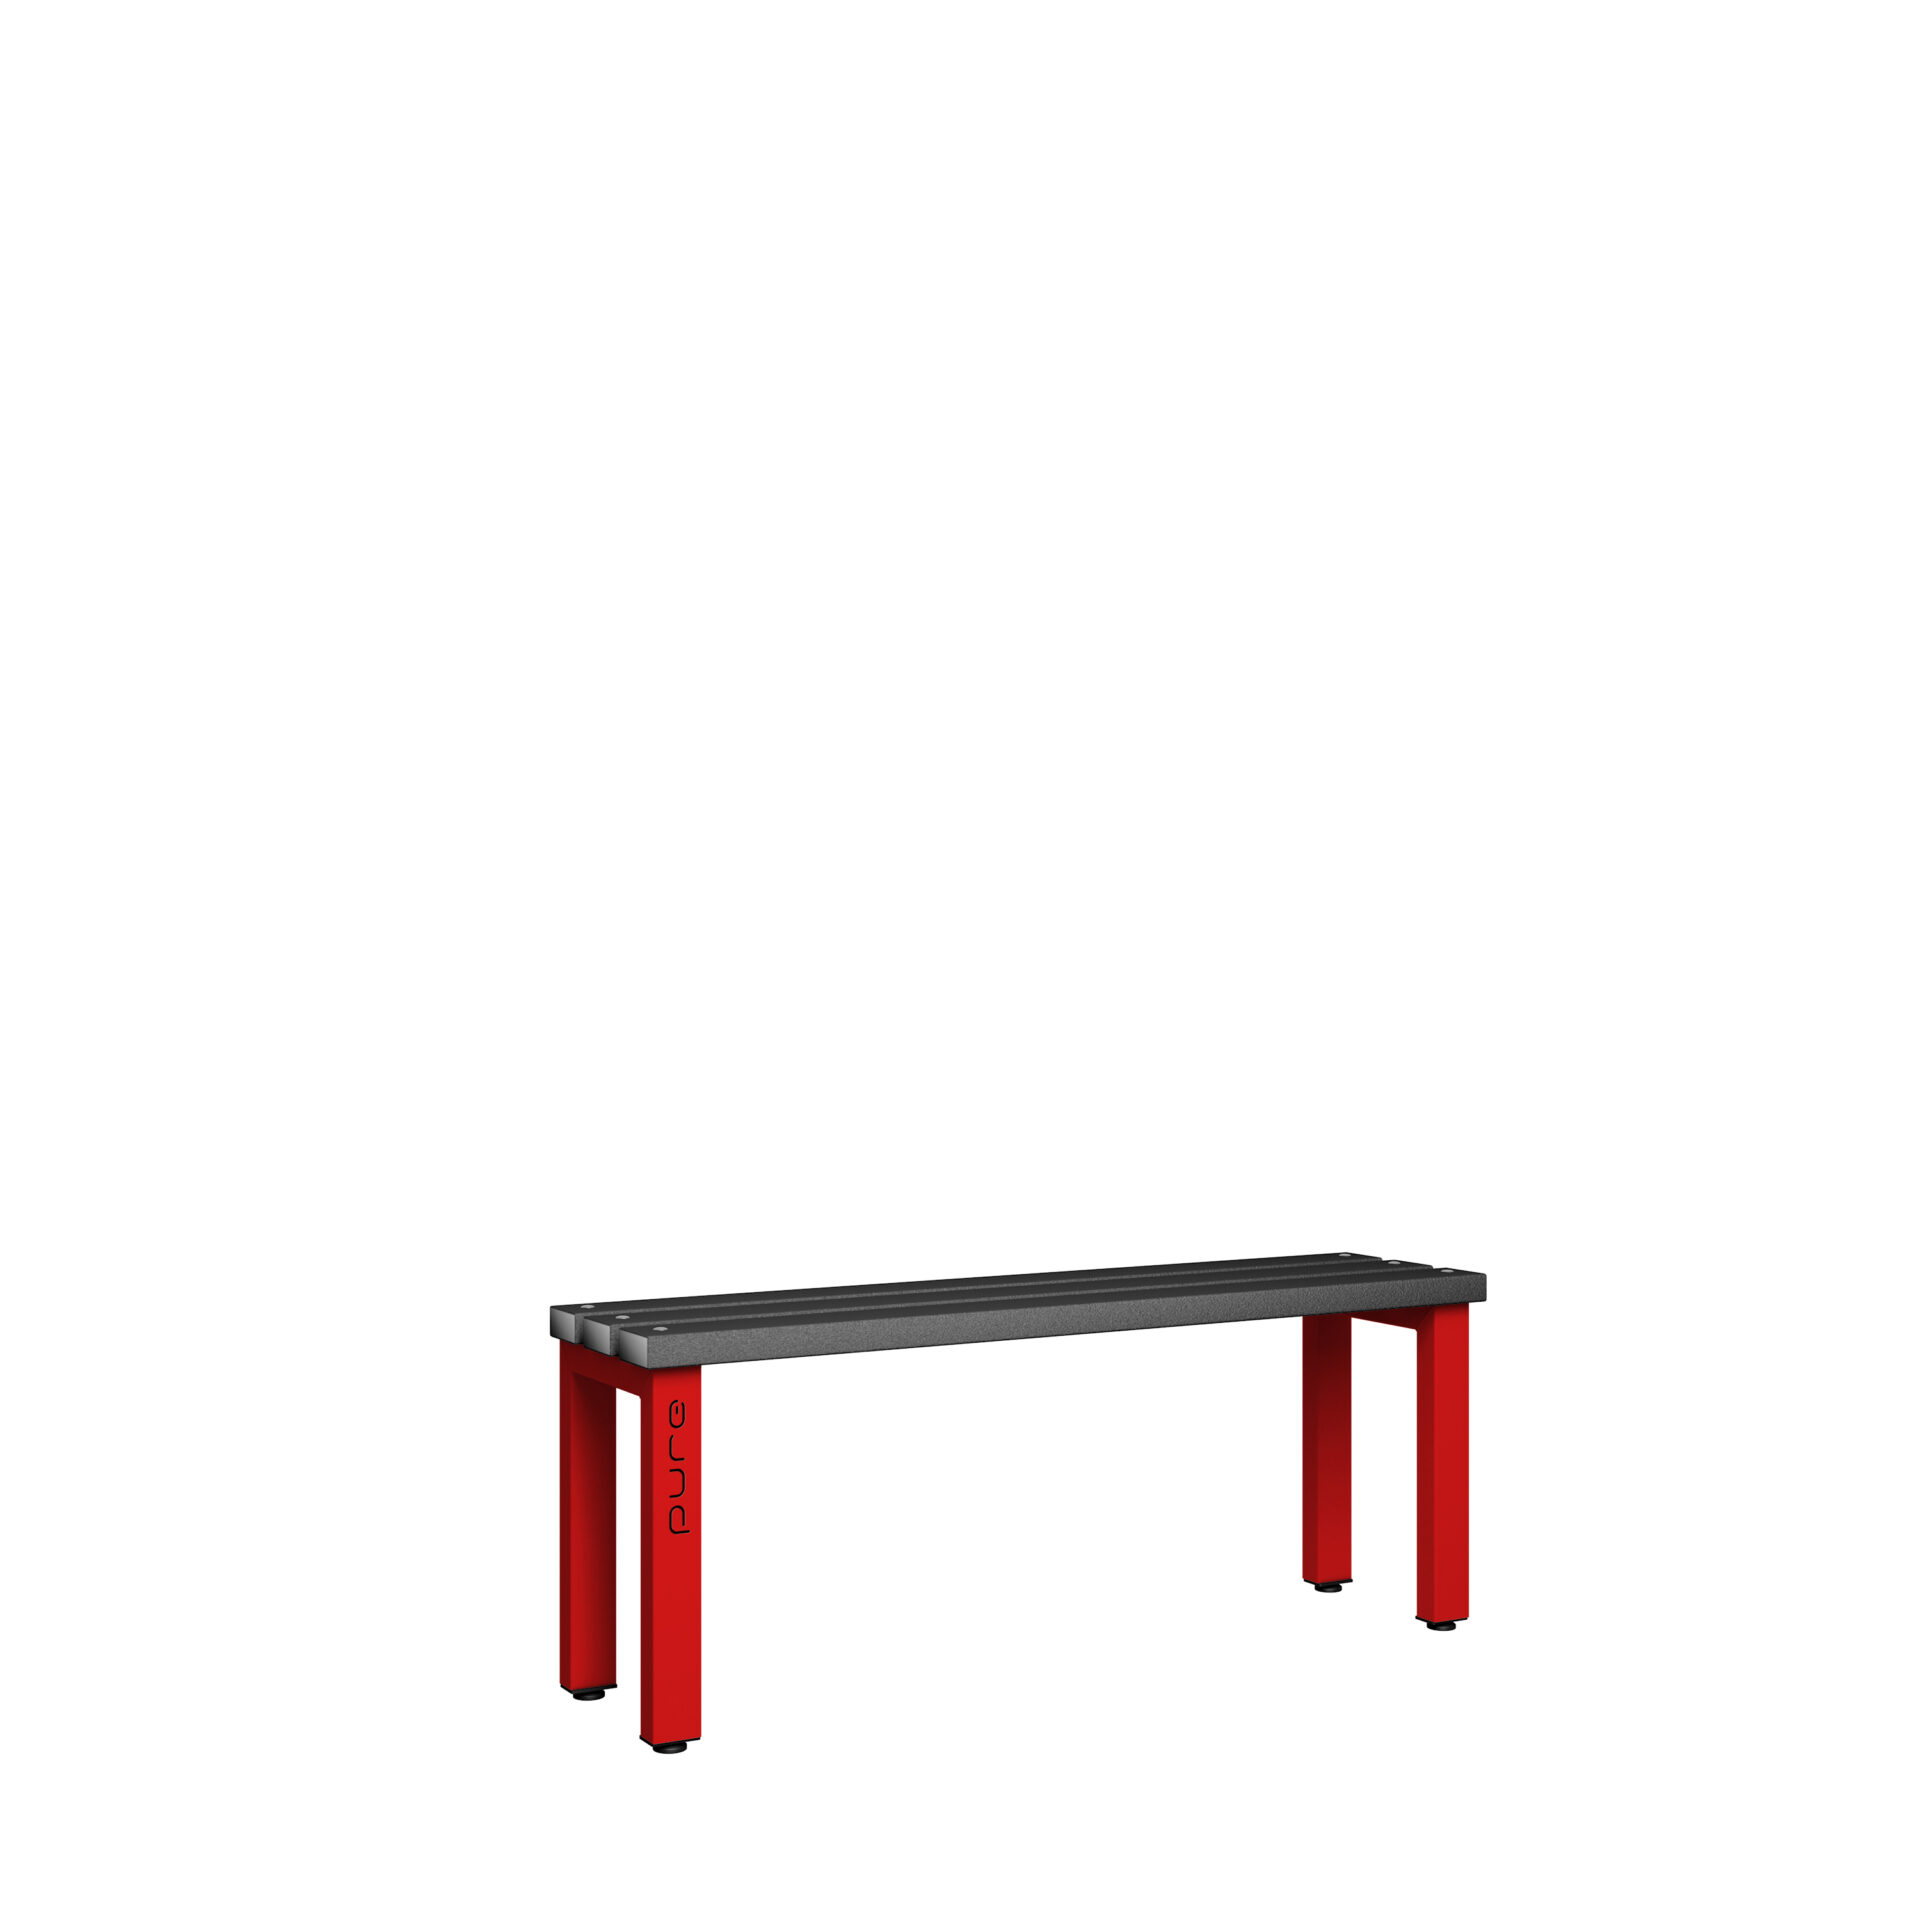 Pure Carbon Zero Single Sided 1200mm Standard Bench